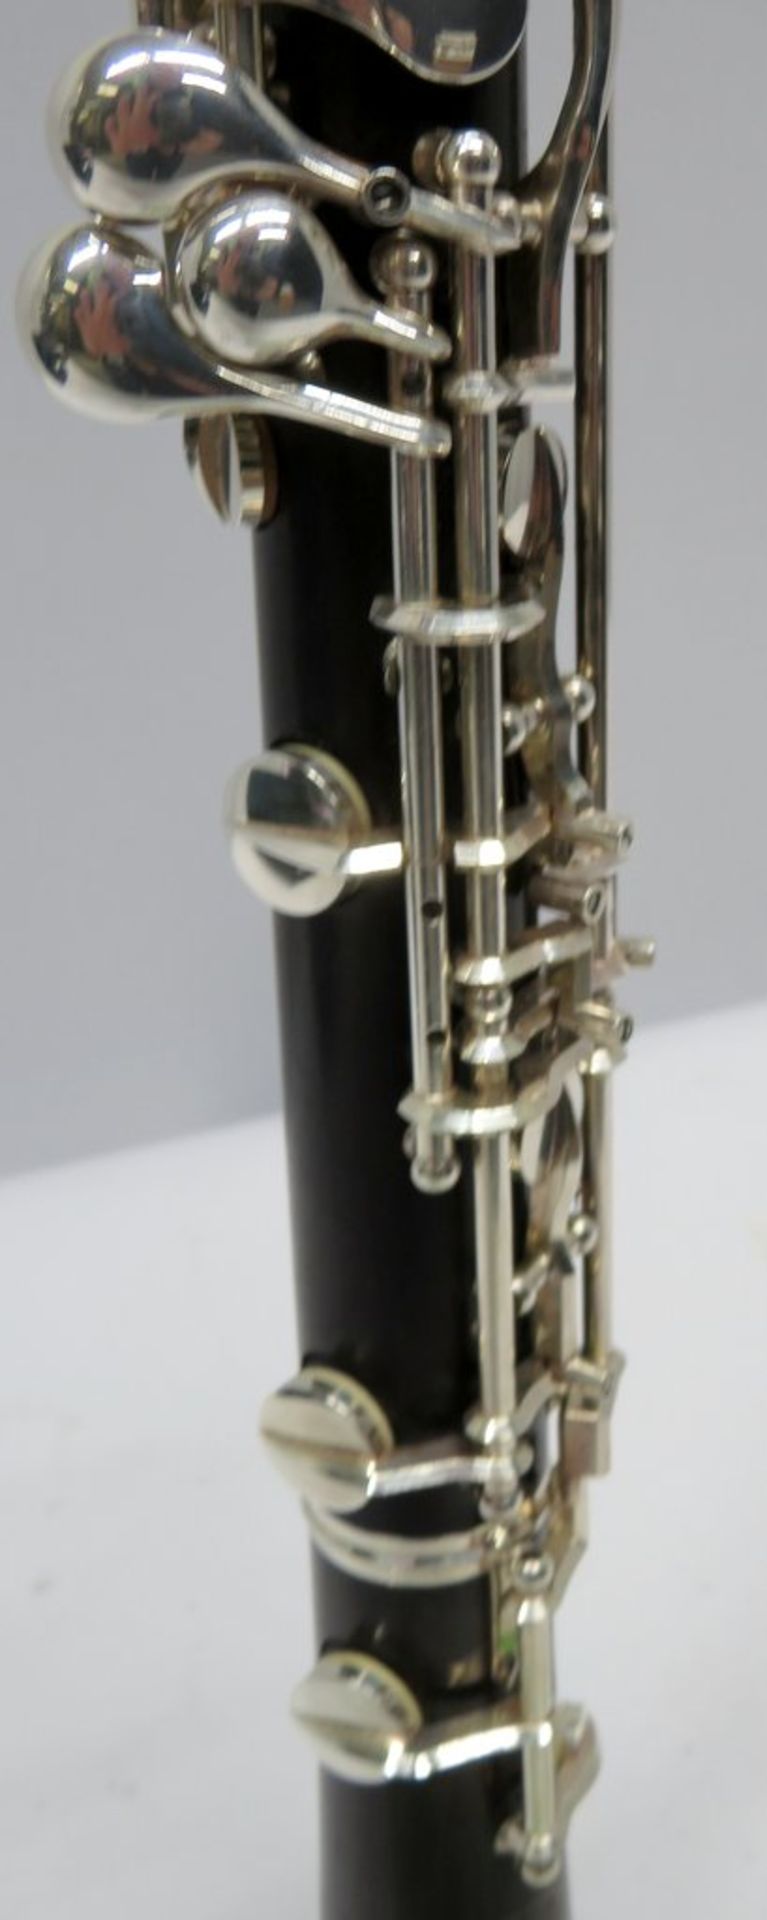 Howarth Of London S40c Oboe Complete With Case. - Image 17 of 20